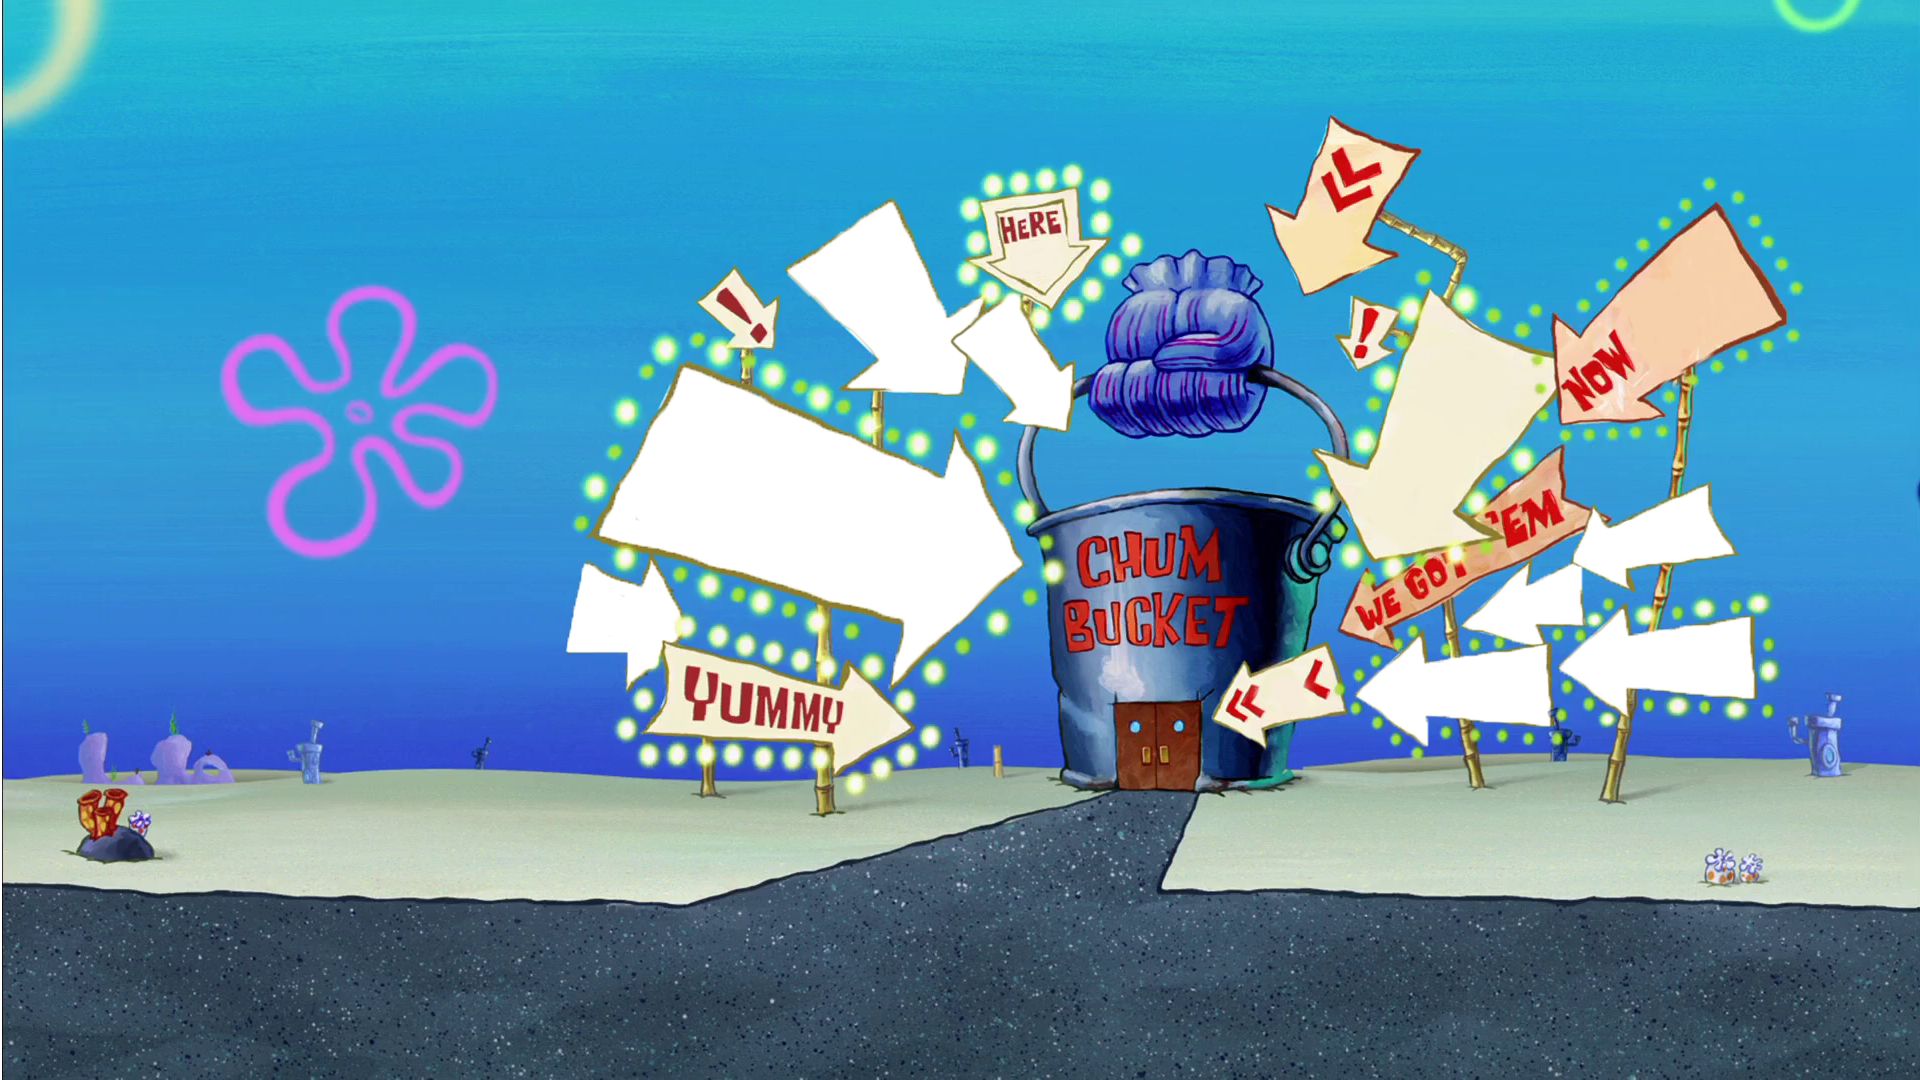 Chum Bucket from SB Movie with empty signs